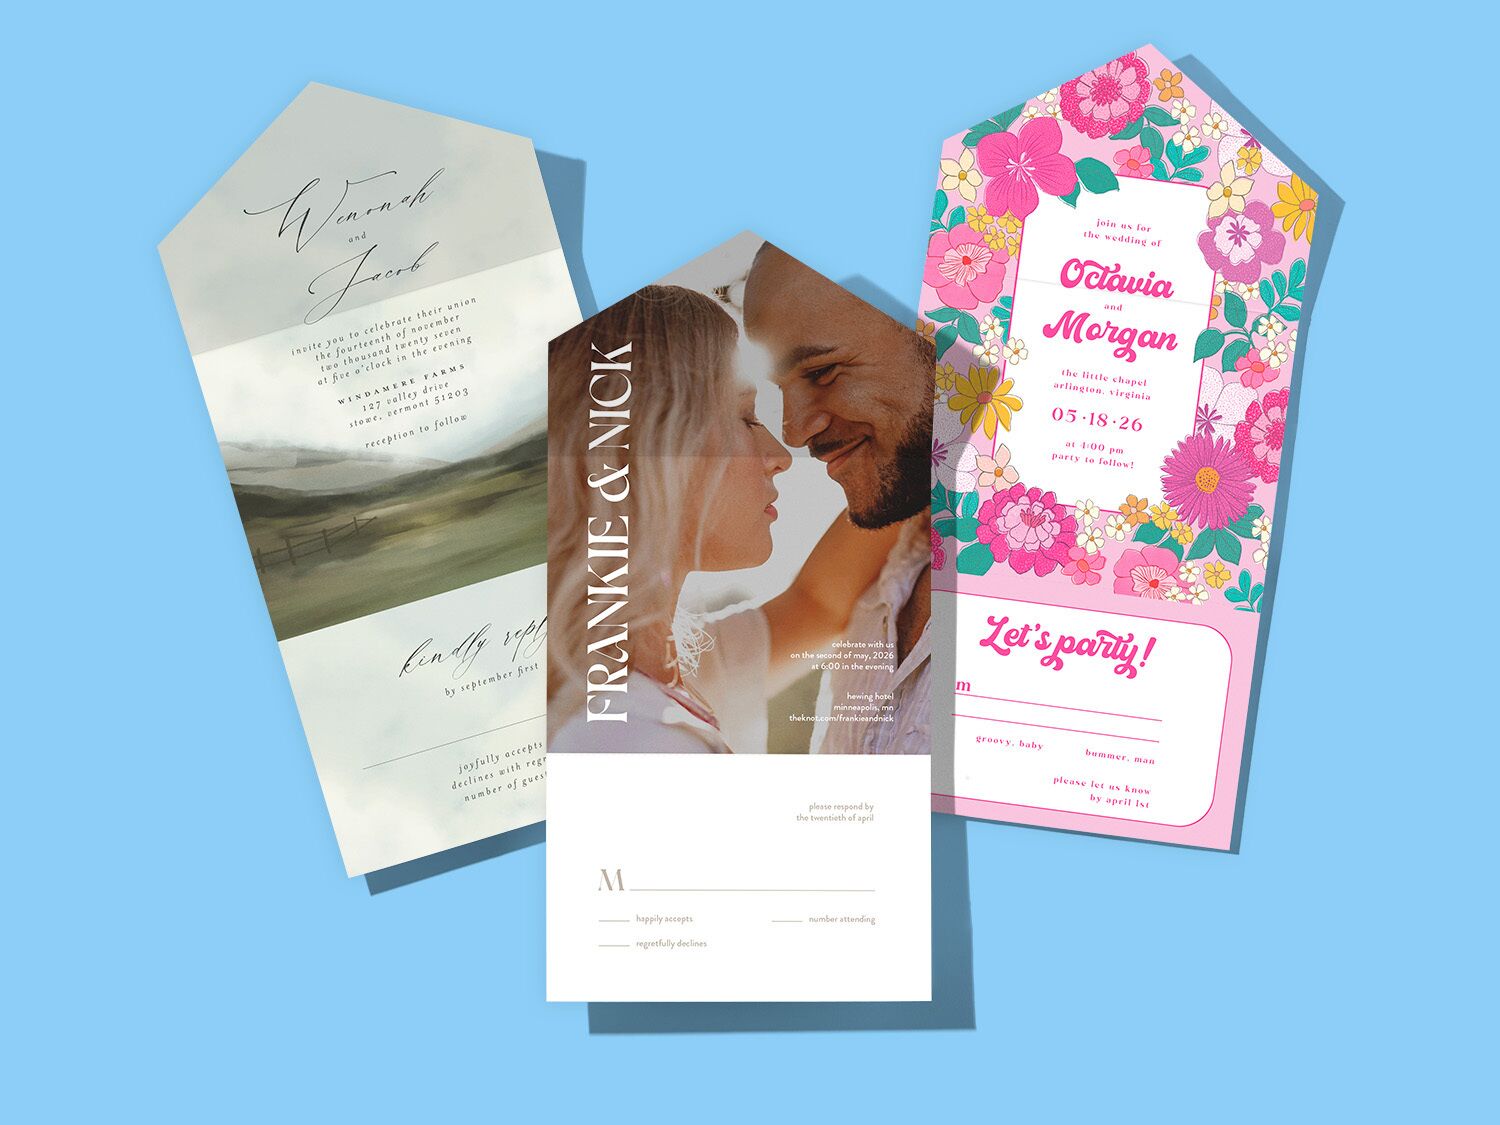 Various styles of wedding invitations on blue background